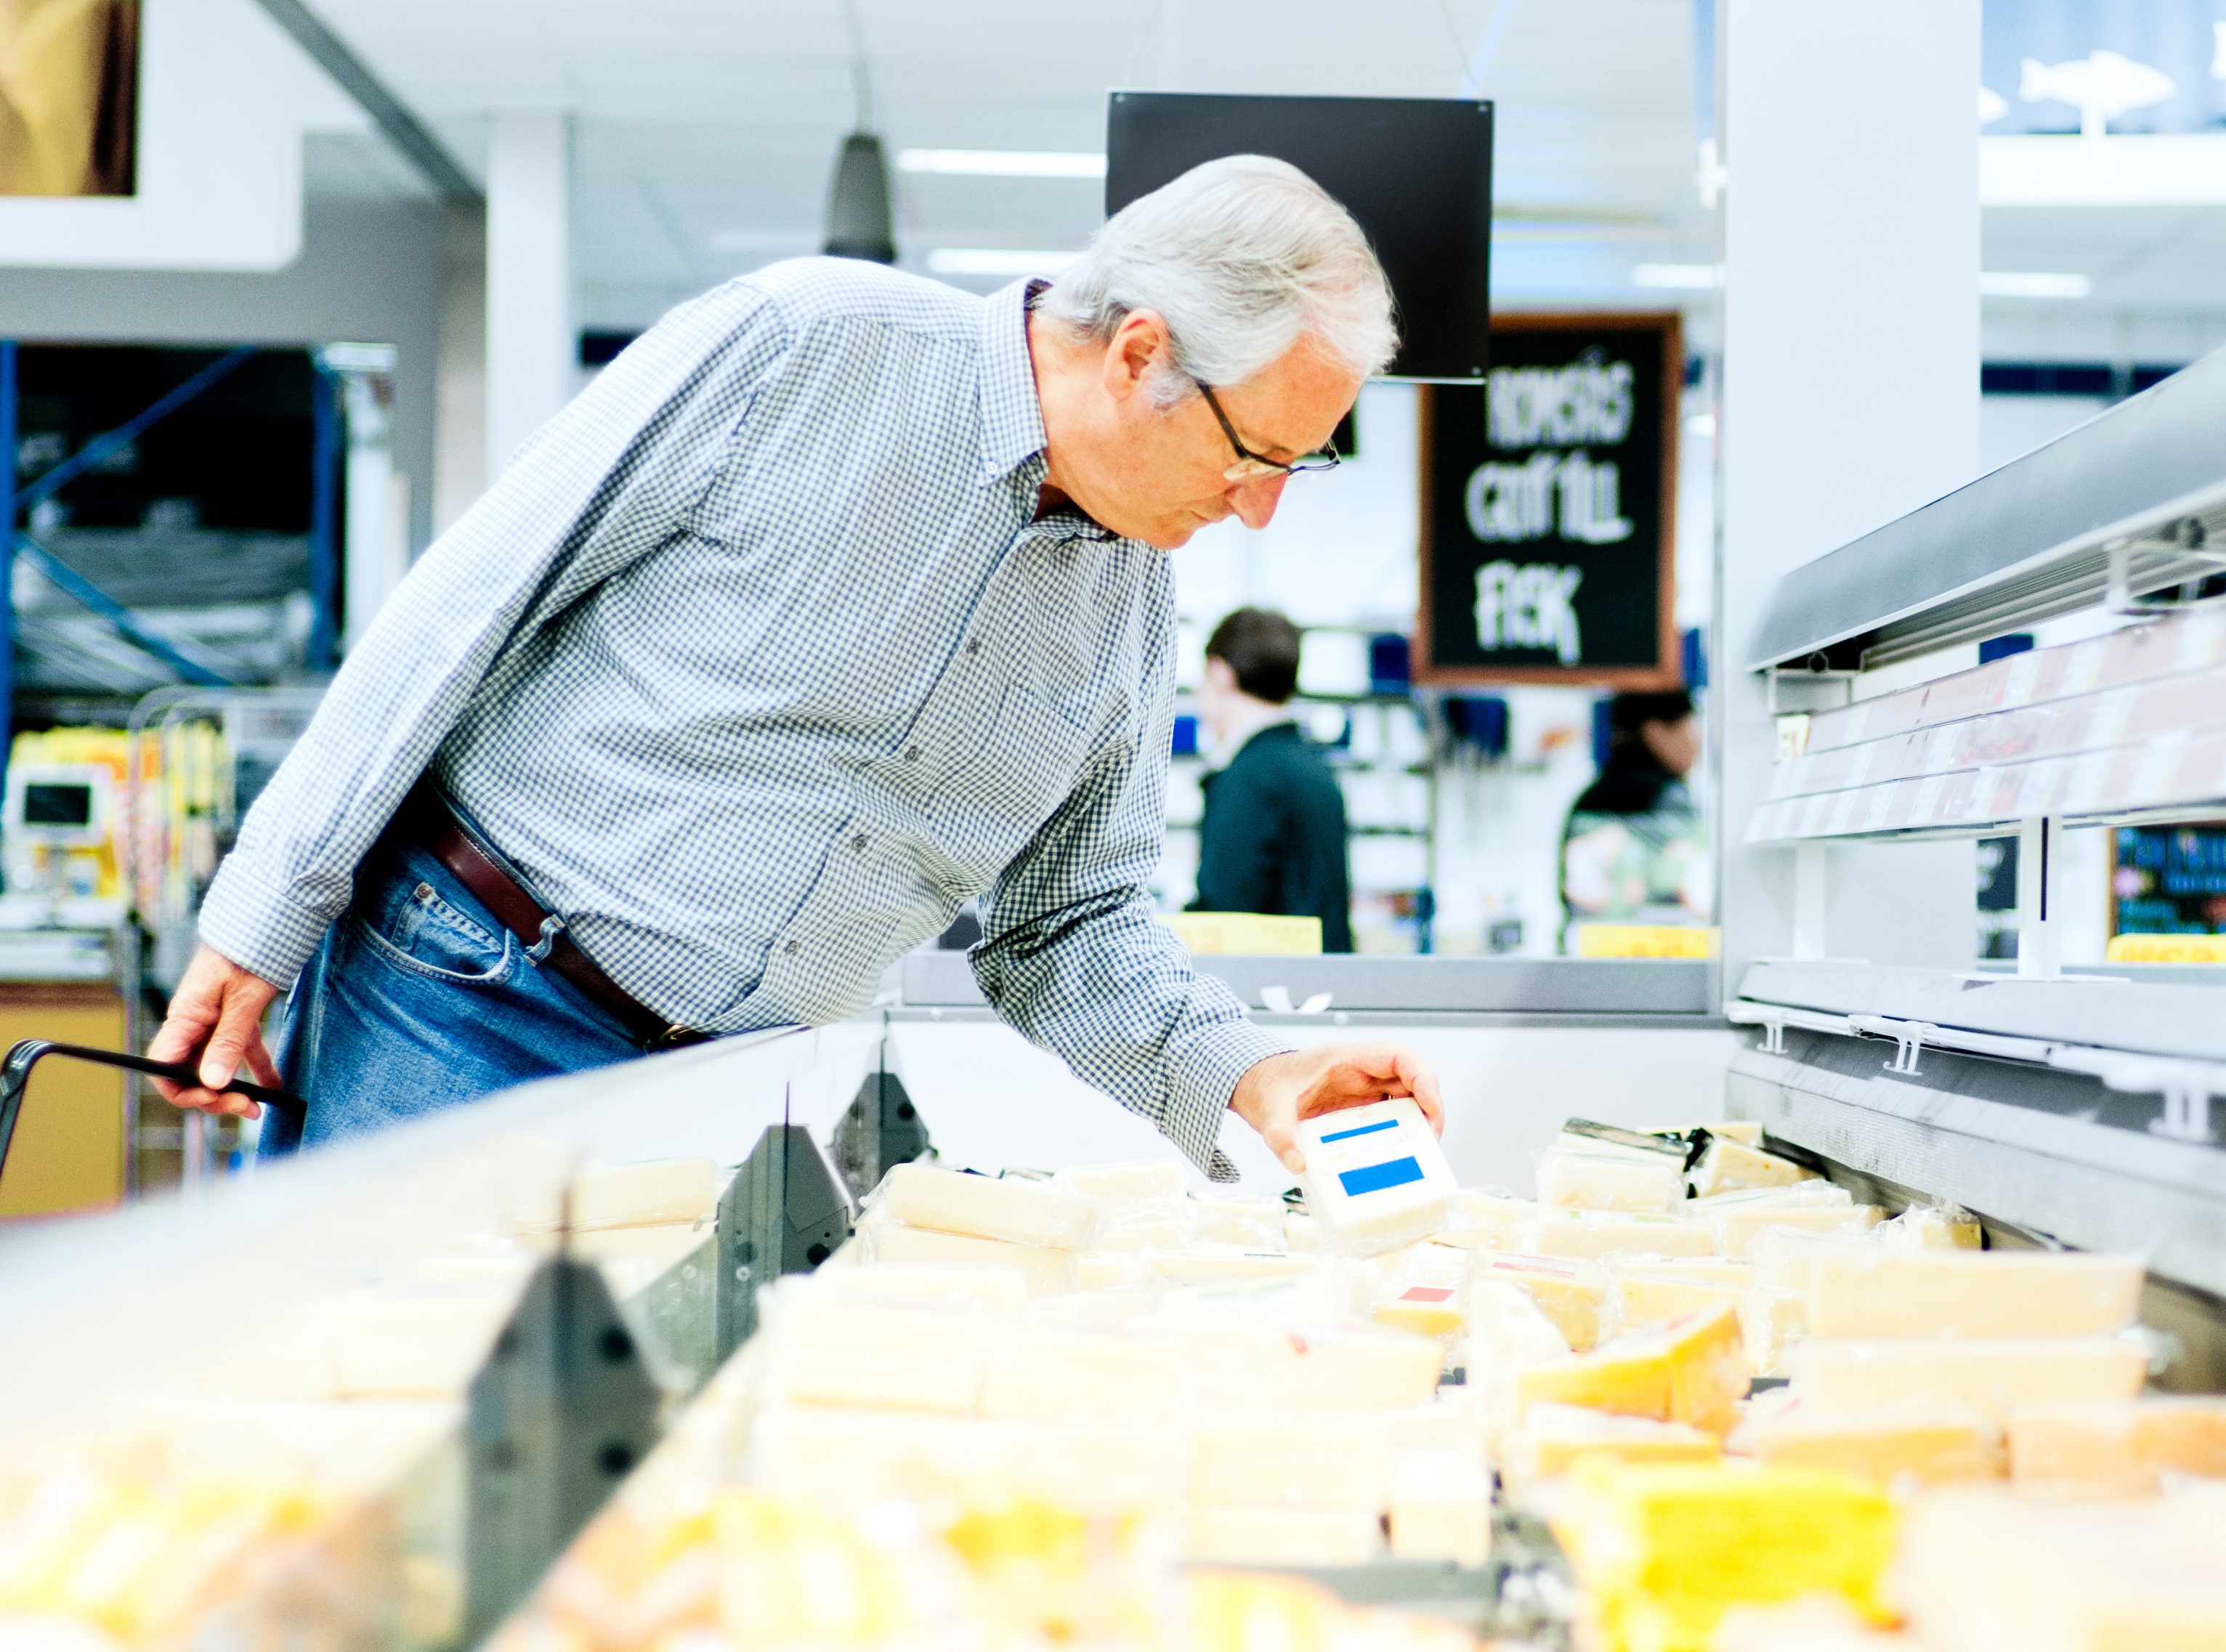 Man reading cheese label at a grocery store